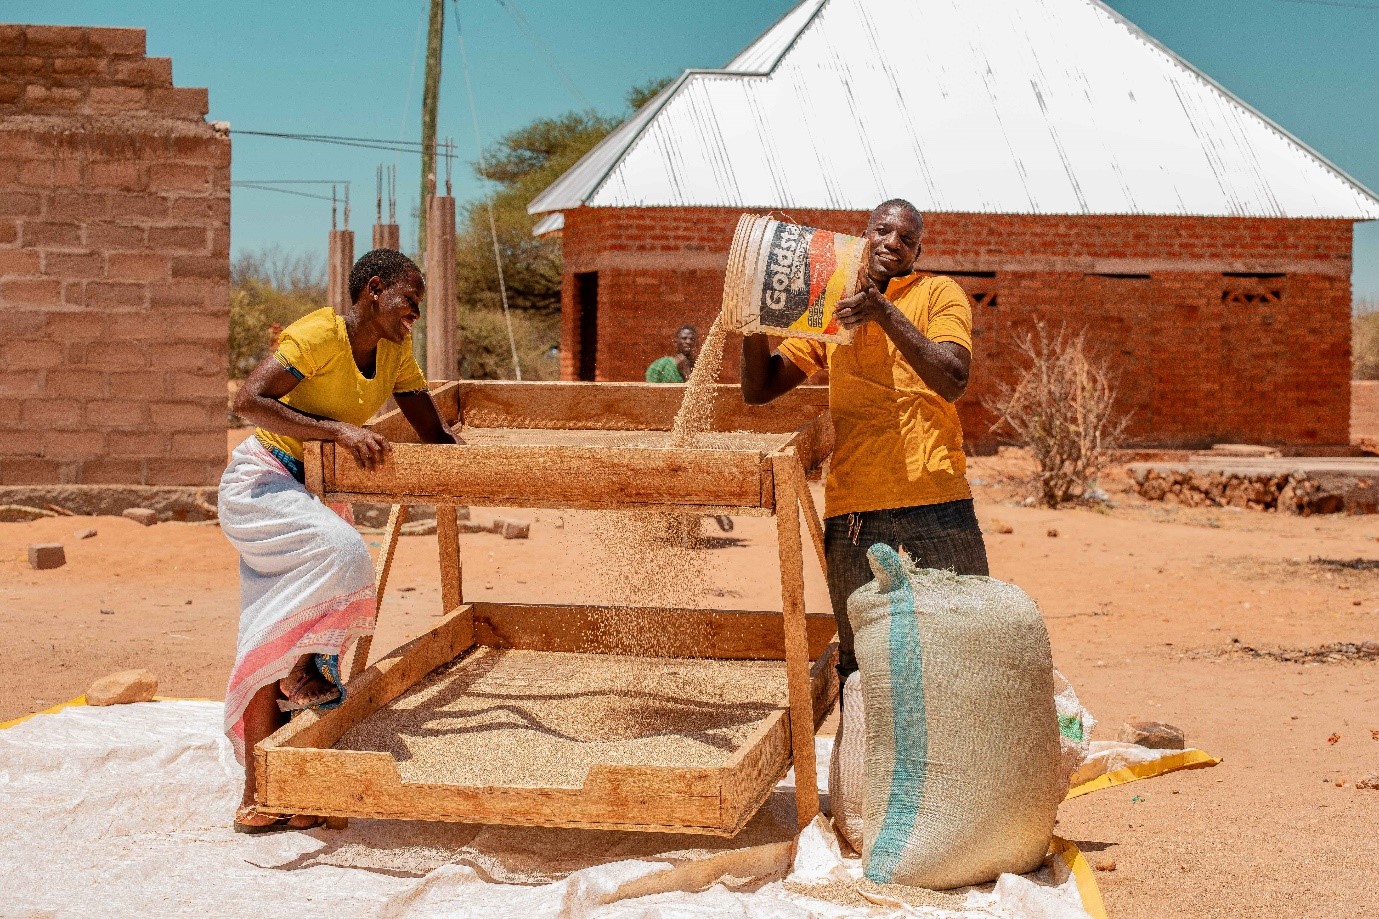 A man and woman in Tanzania milling grain using a wooden machine.